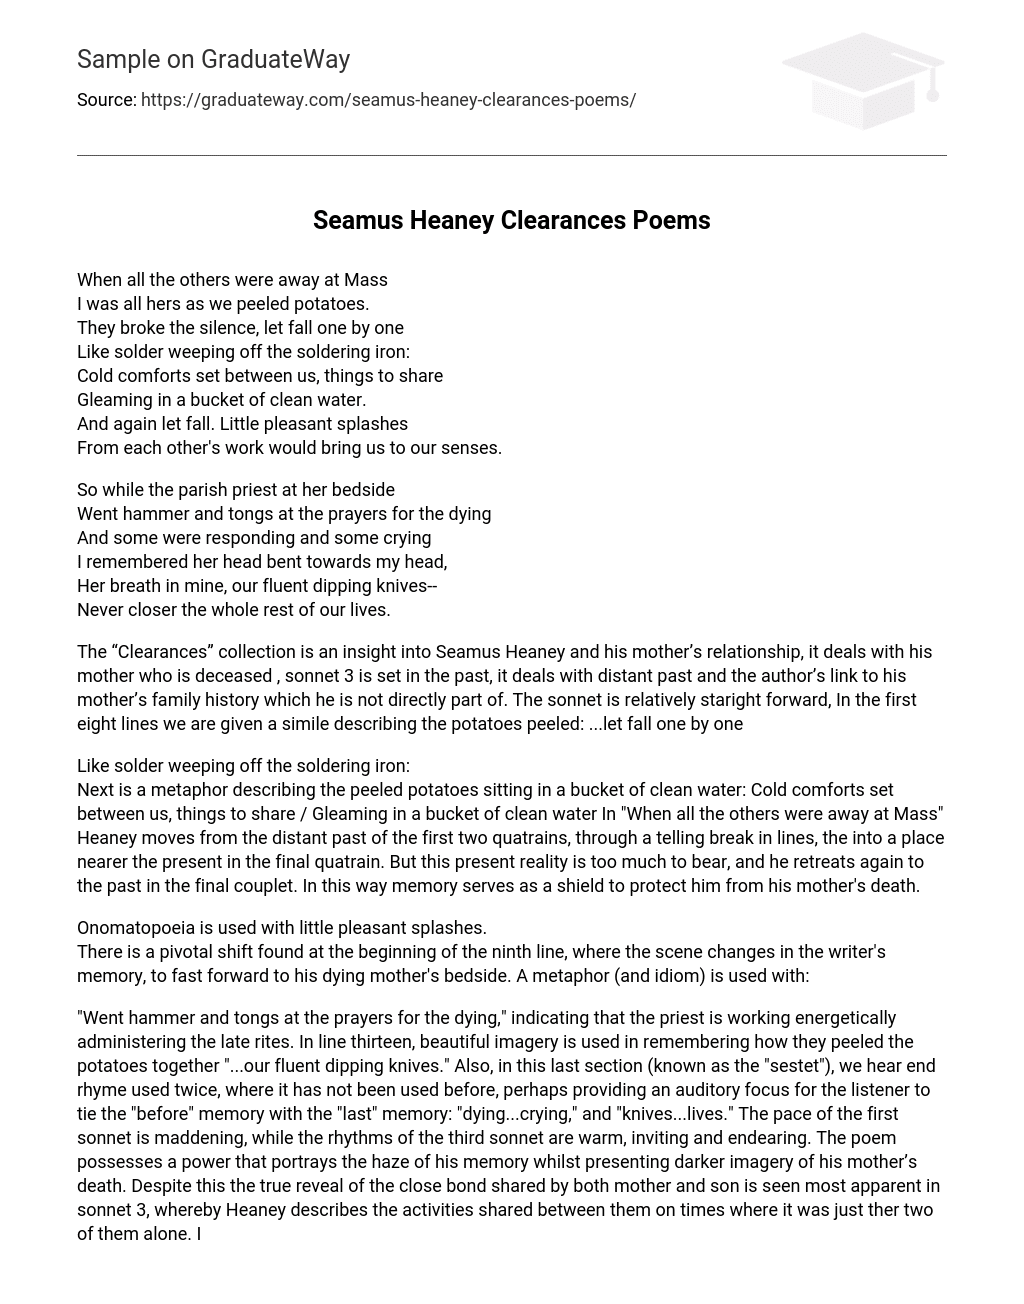 Seamus Heaney Clearances Poems Analysis